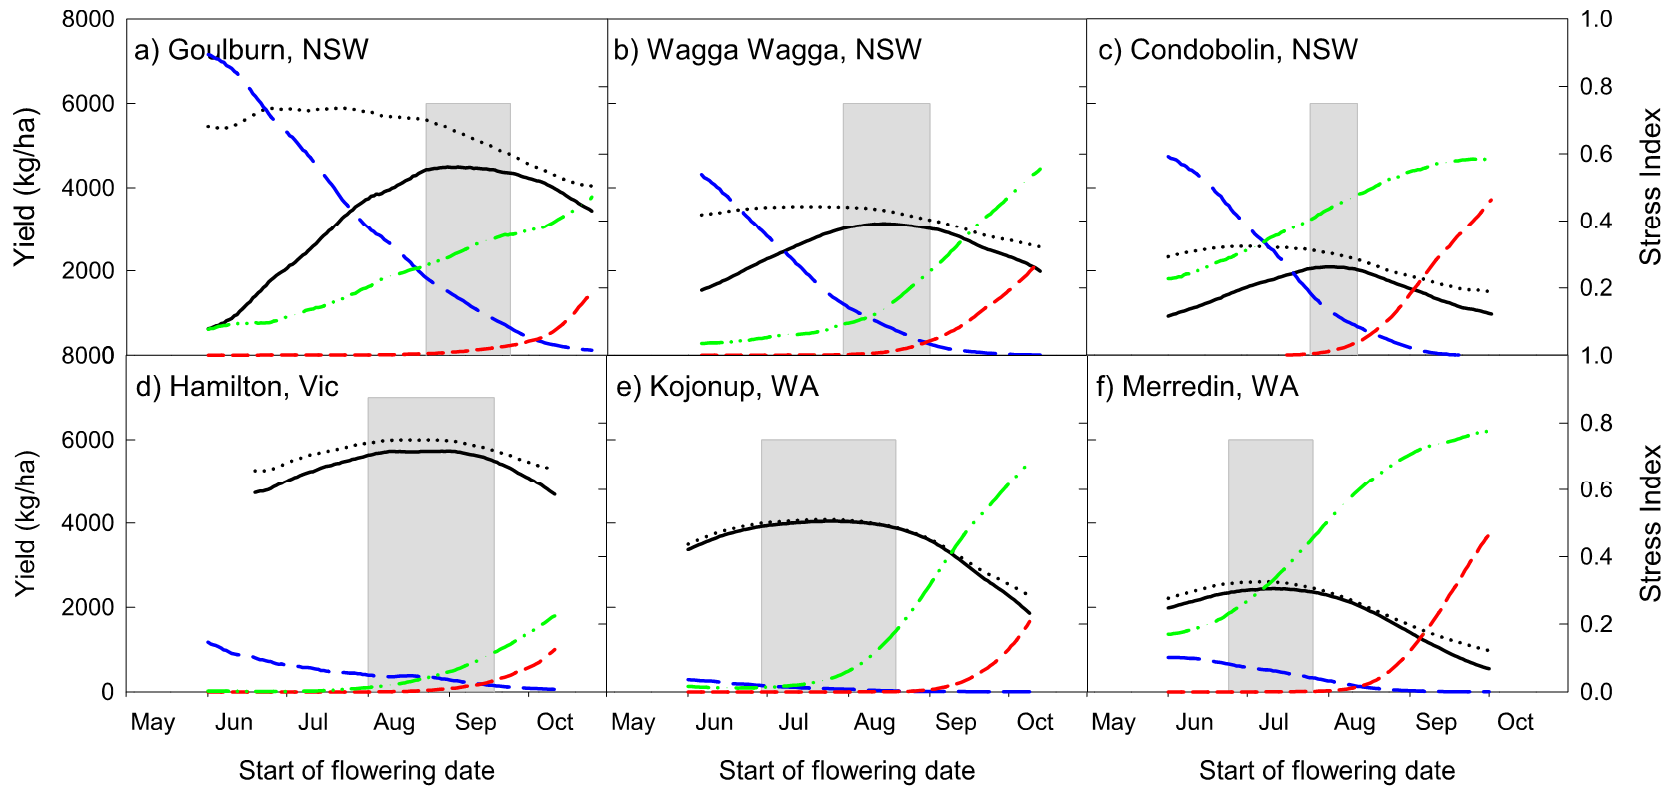 Six graphs showing the optimal time to start flowering in different regions around Australia. Showing the simulated potential yield: no frost or heat limitation (black dotted), with frost or heat limitation (solid black). Frost potential (blue long dash), heat stress potential (red short dash) and water limited potential (green dash-dot-dot). The grey box represents the optimum time to start flowering to achieve 95% of the water limited yield potential.